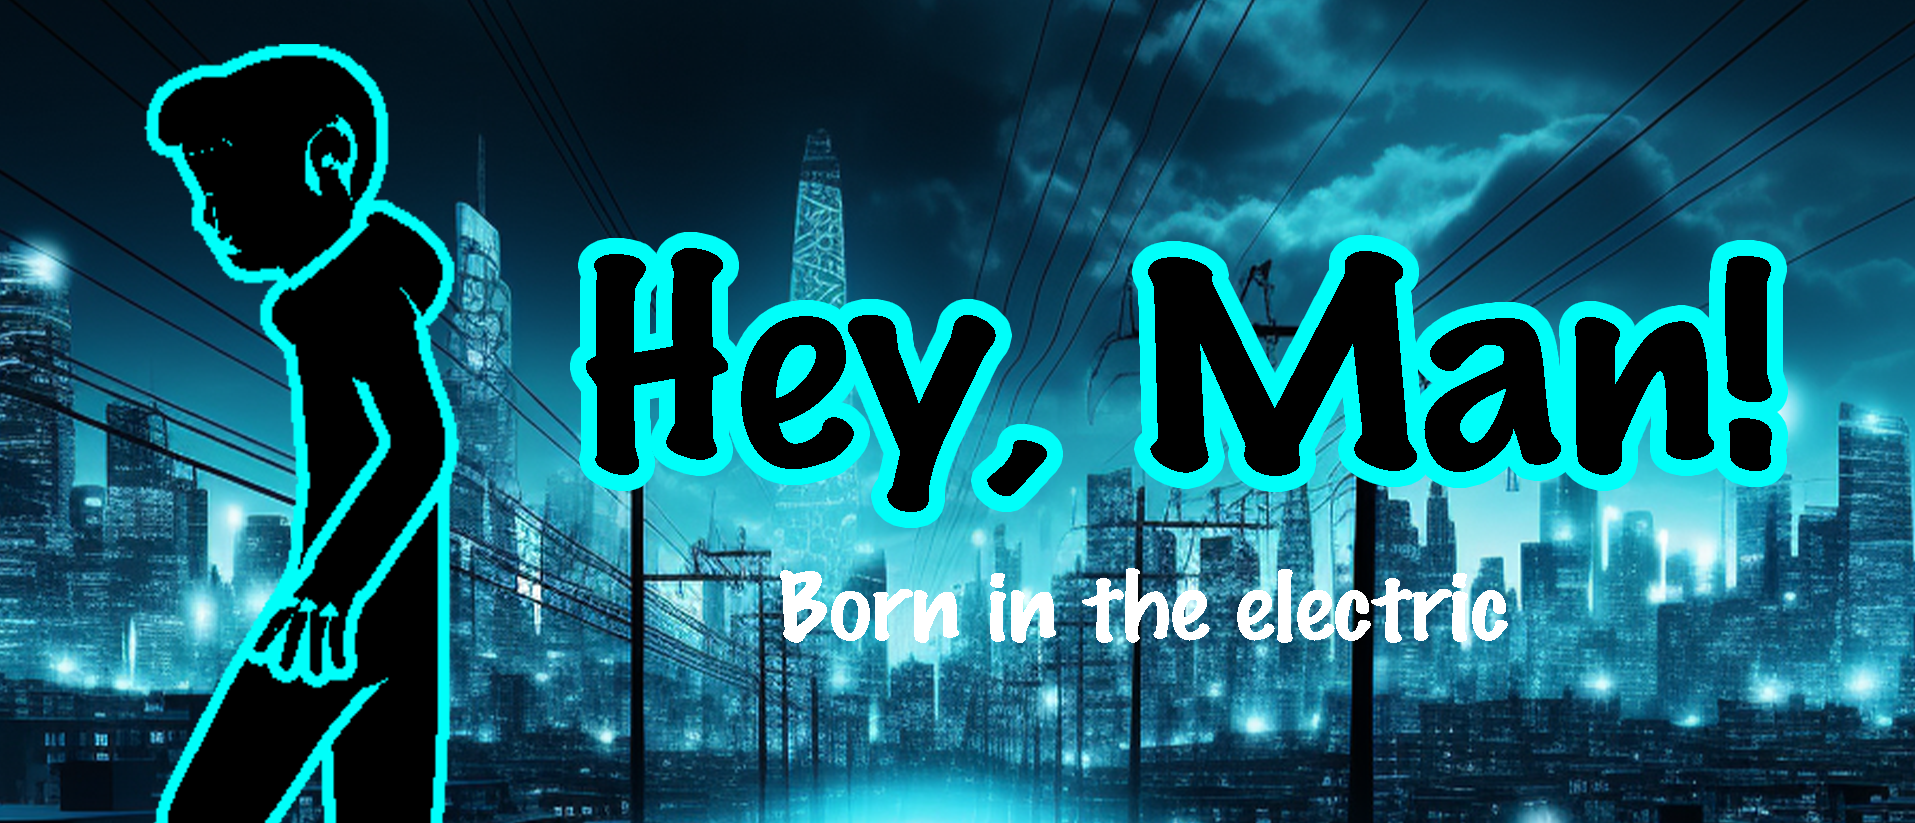 Hey, Man! - born in the electric